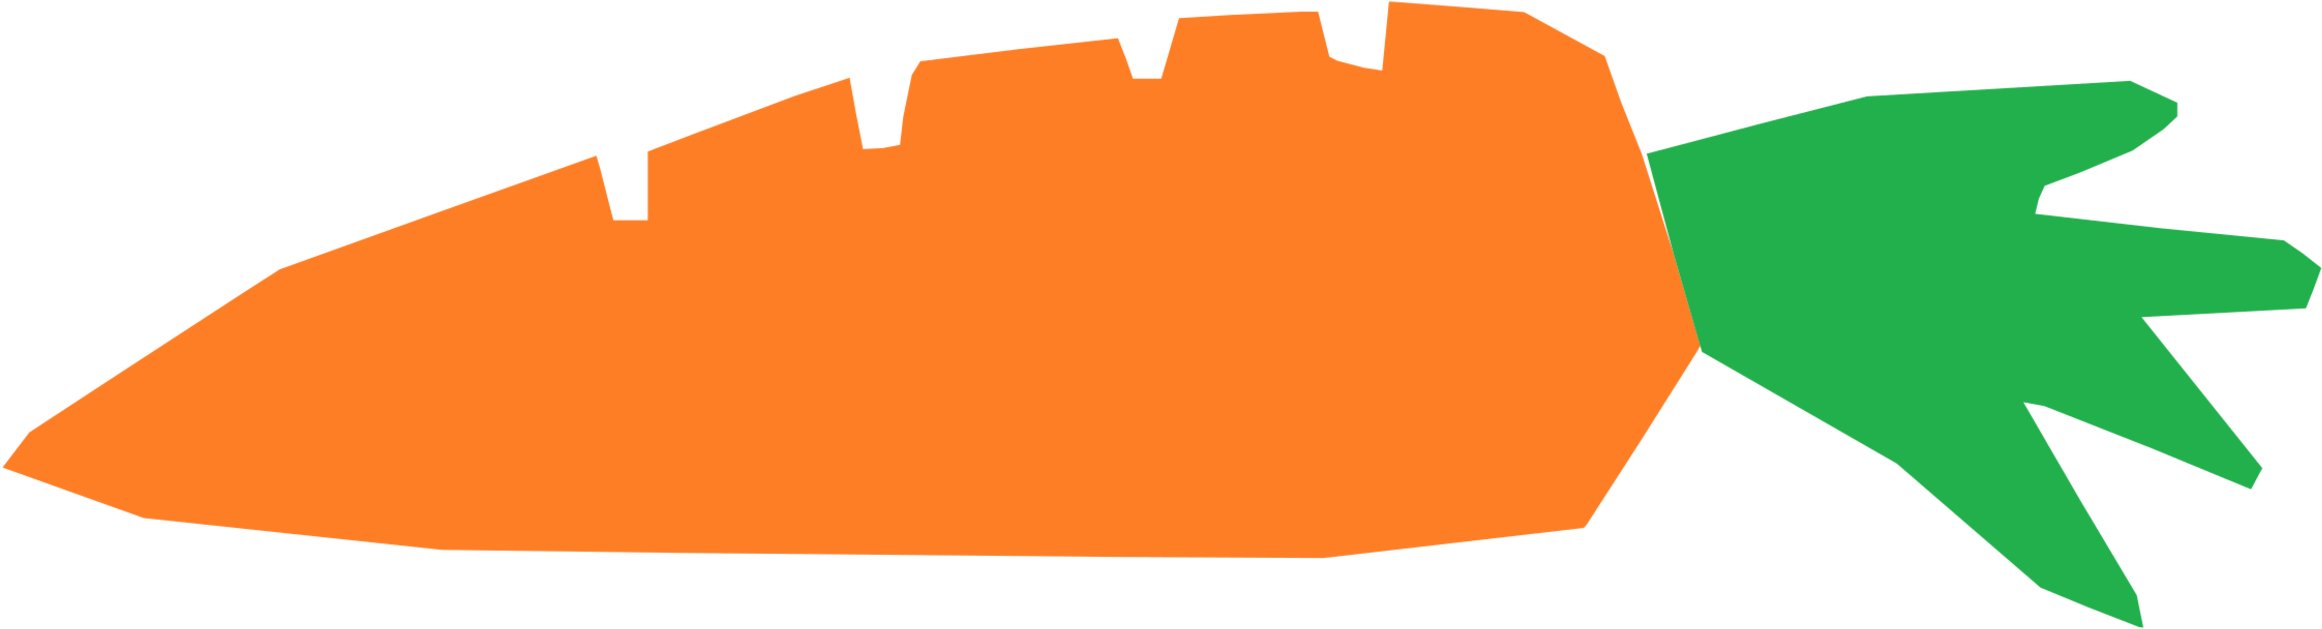 Fresh Carrot Graphic PNG